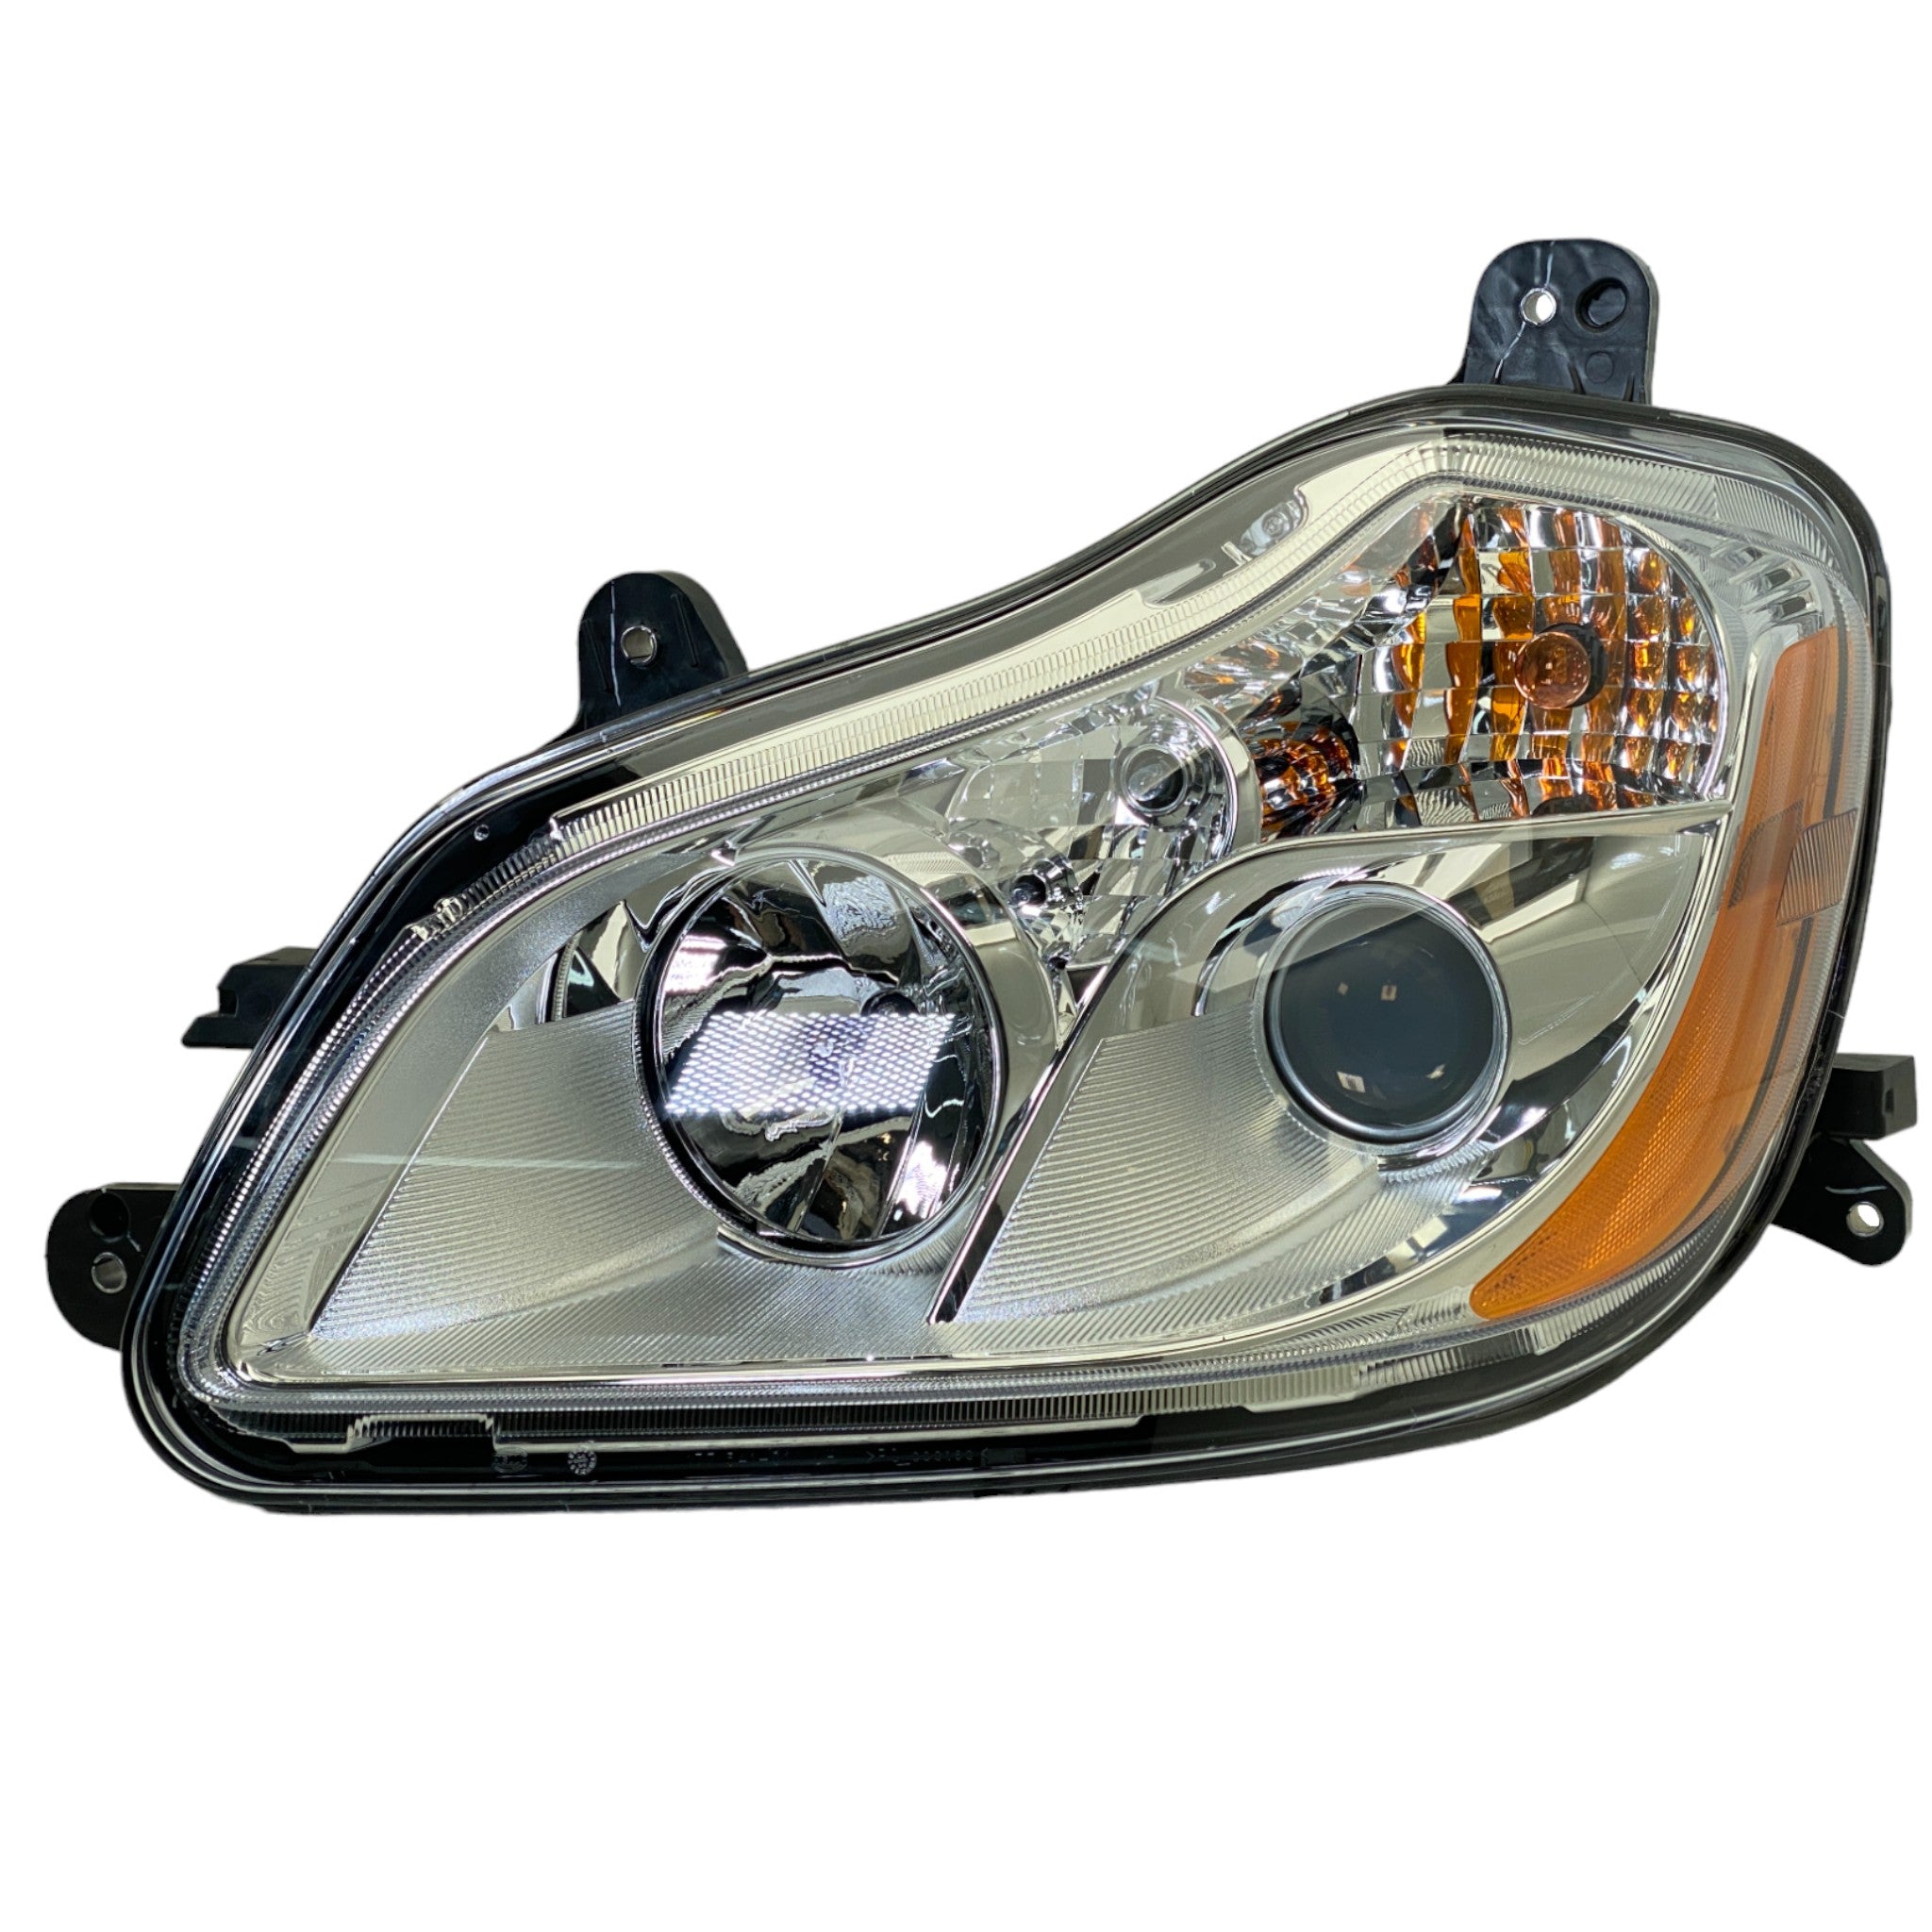 P54-6164-100 Paccar Left Side Halogen Headlight Assy For Kenworth T680 2013-2021